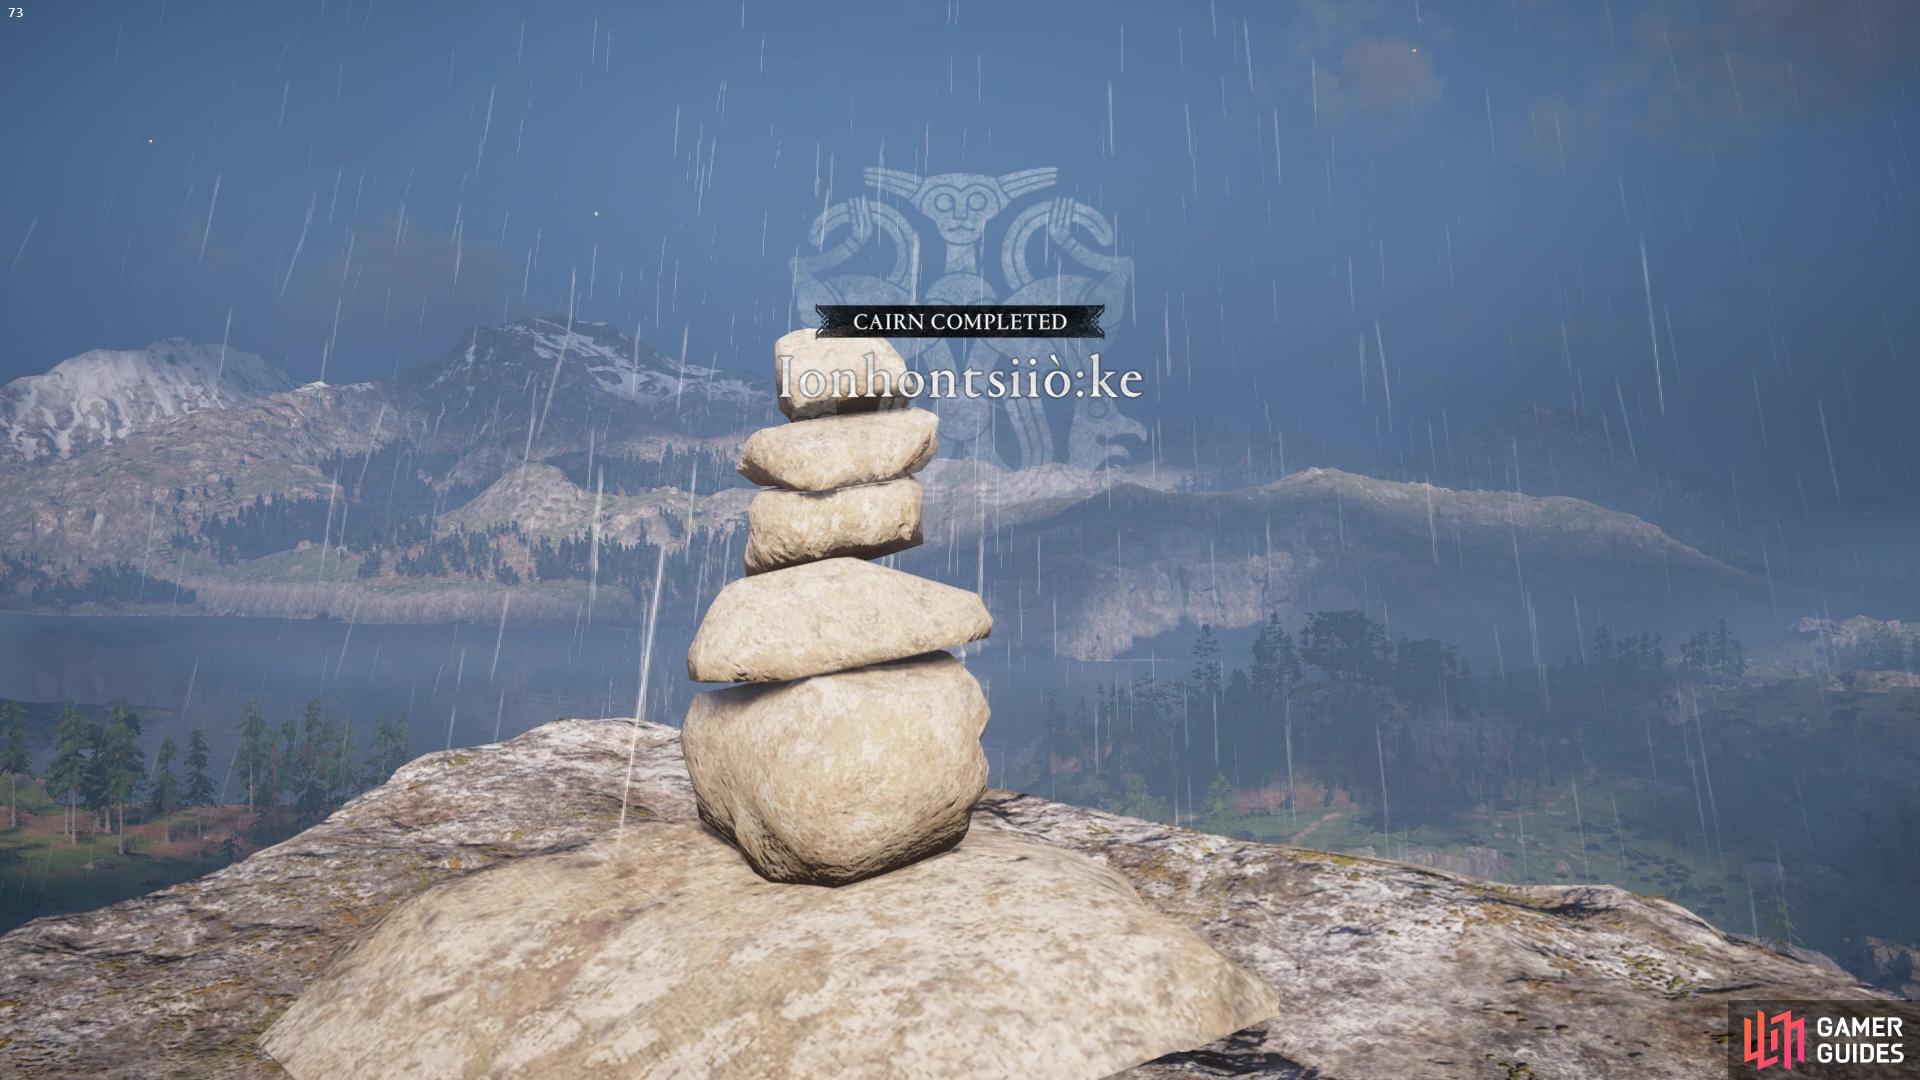 its an easy stack of stones to build!